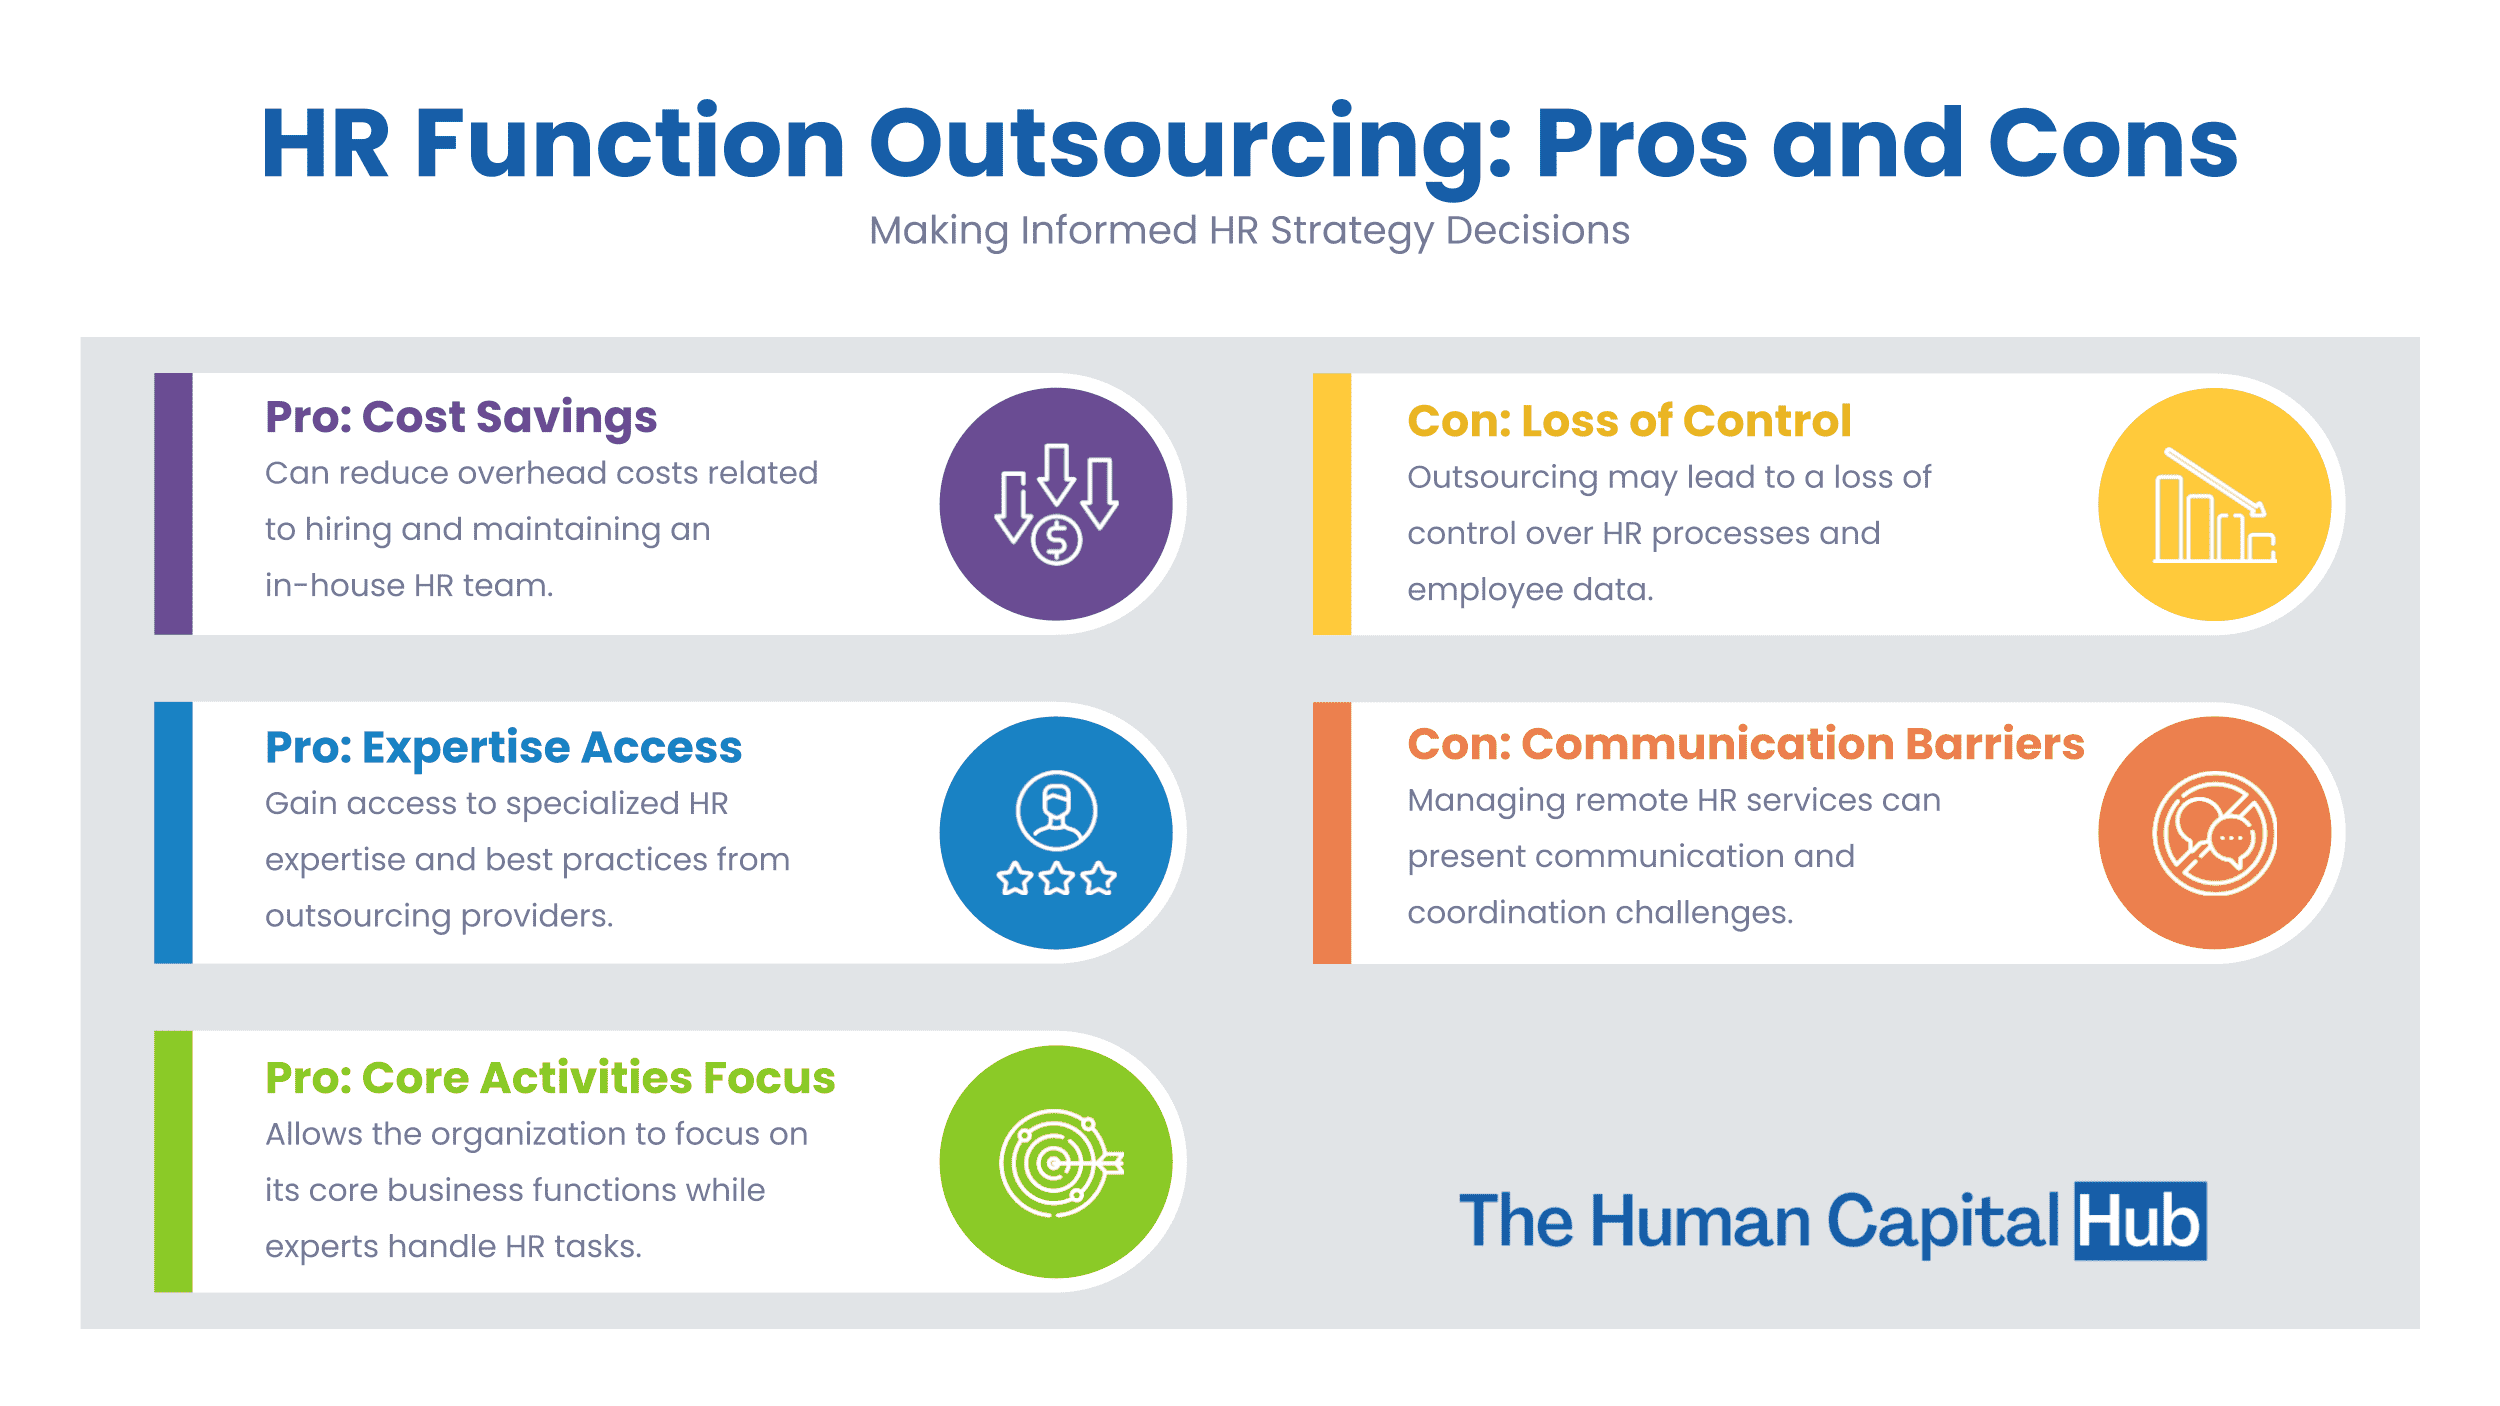 What are the Advantages and Disadvantages of Outsourcing HR Functions?